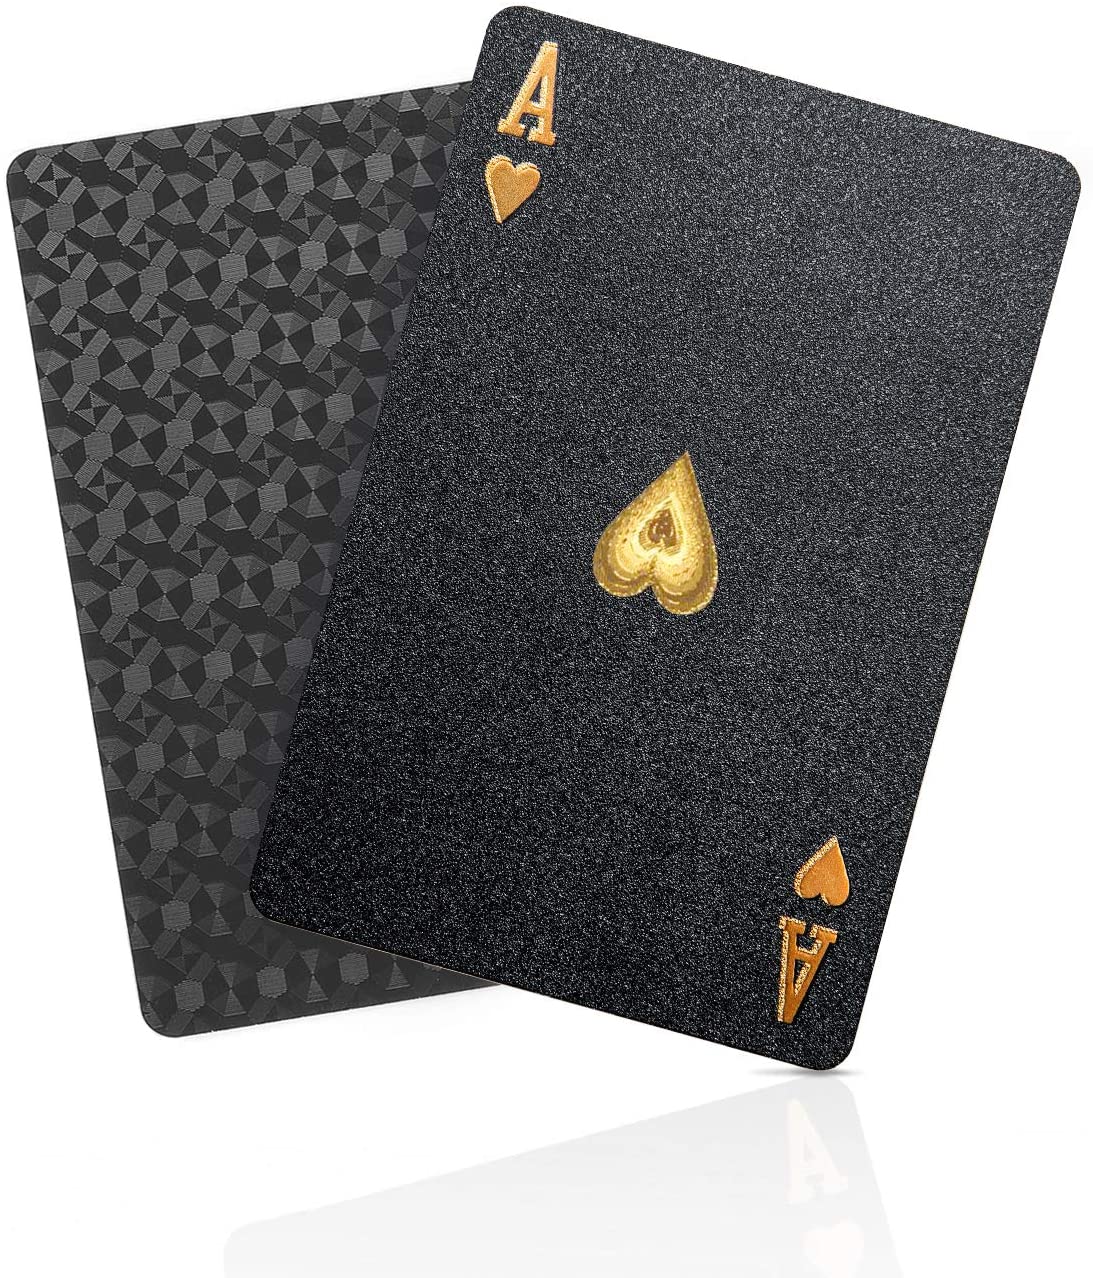 Black Matte Magic Waterproof Non Slippery Deck of Poker Cards with No Art Premium Quality 24K Gold and Silver Plated Replica Bills